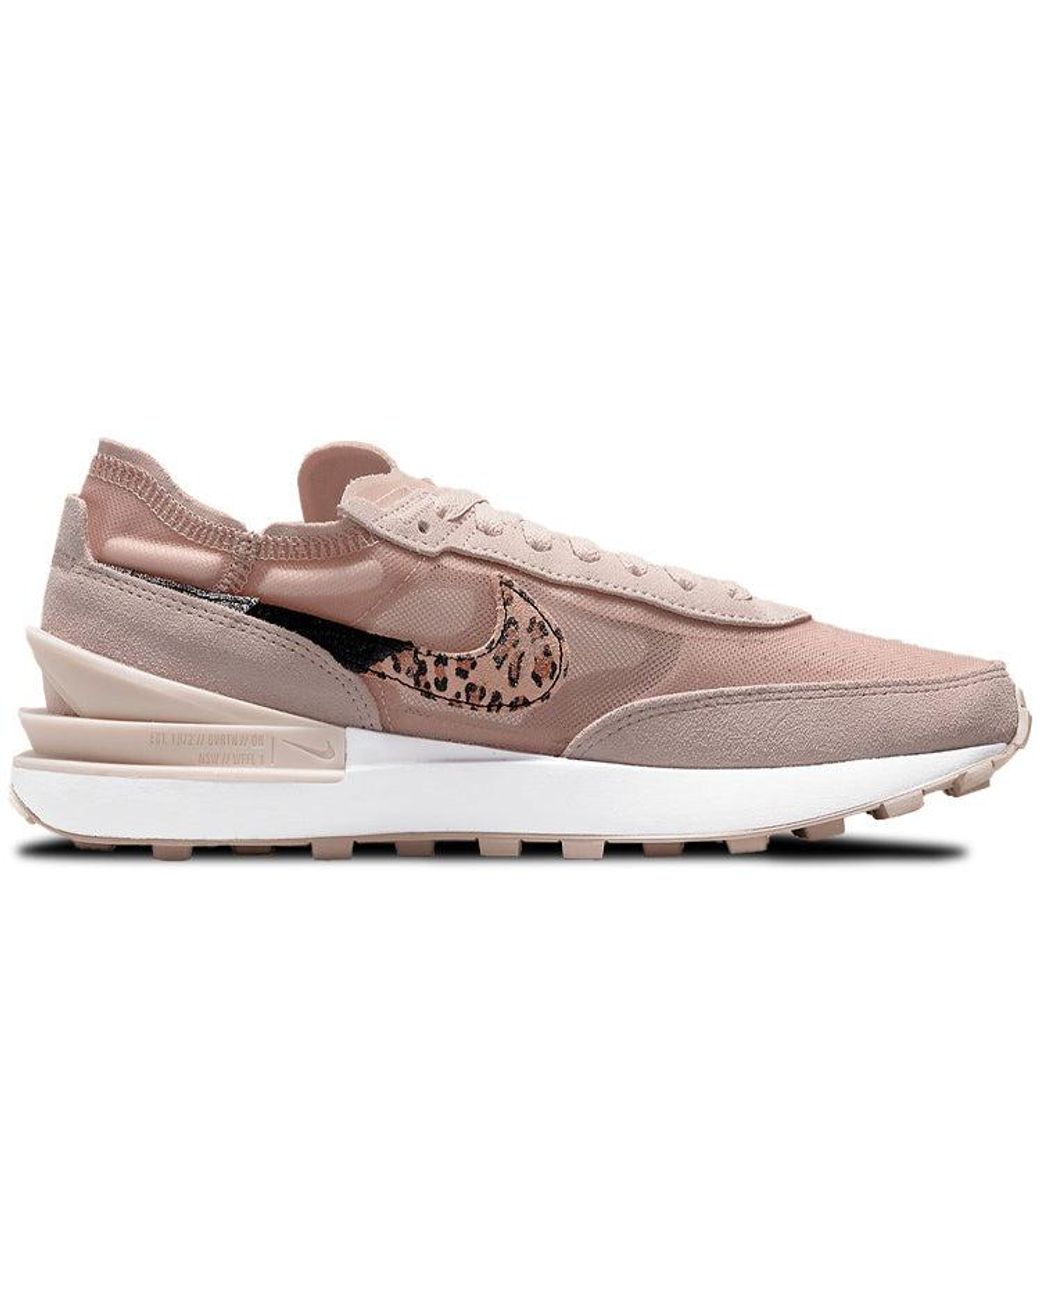 Nike Waffle One Running Shoes Pink/leopard | Lyst